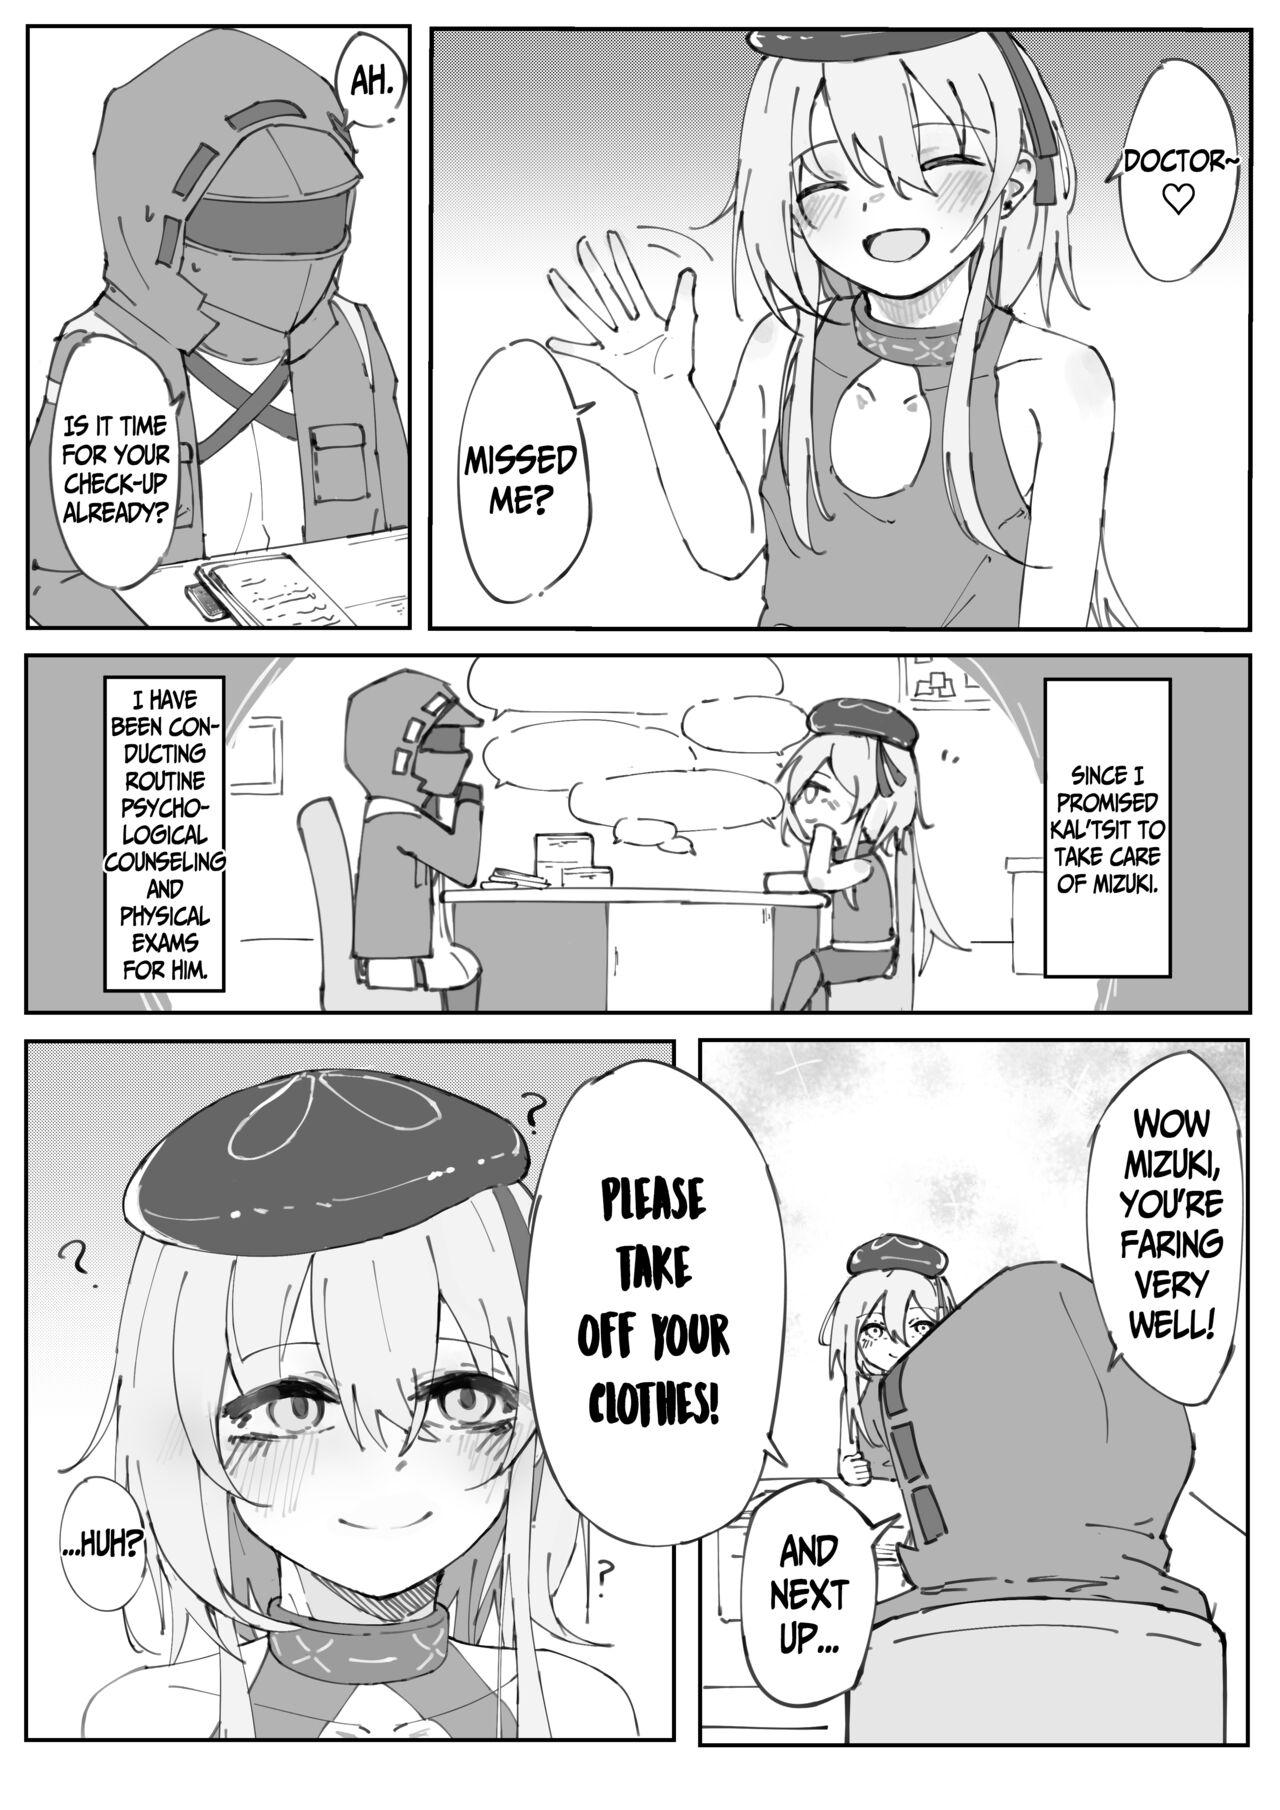 Gay Doctor Come On Me Anytime. - Arknights Wet Cunts - Page 3